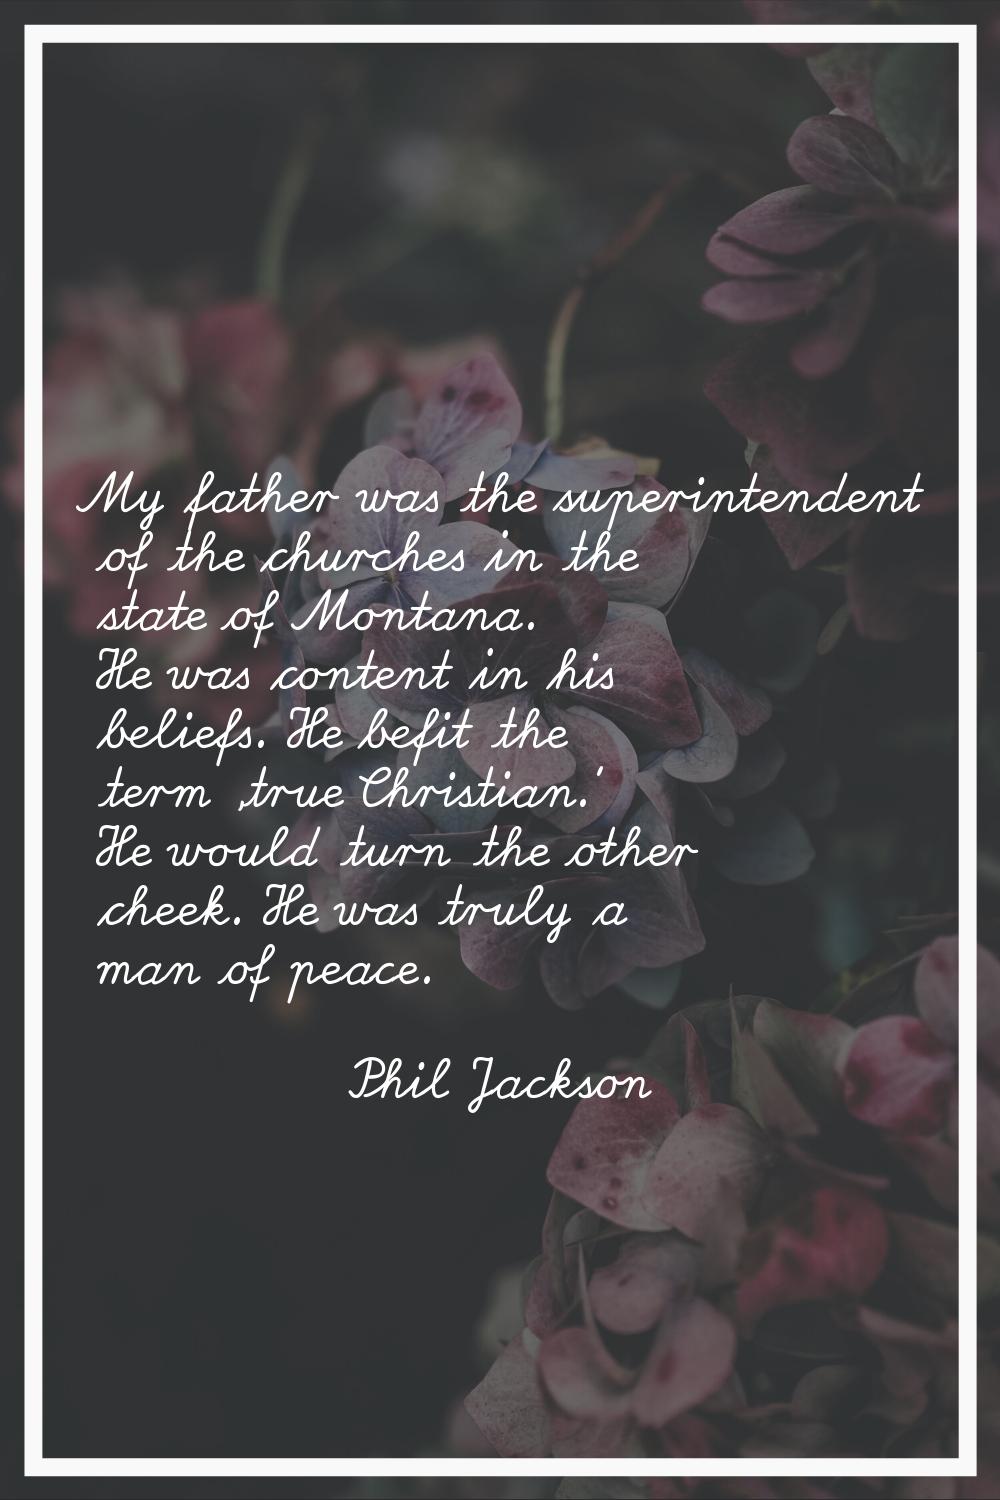 My father was the superintendent of the churches in the state of Montana. He was content in his bel